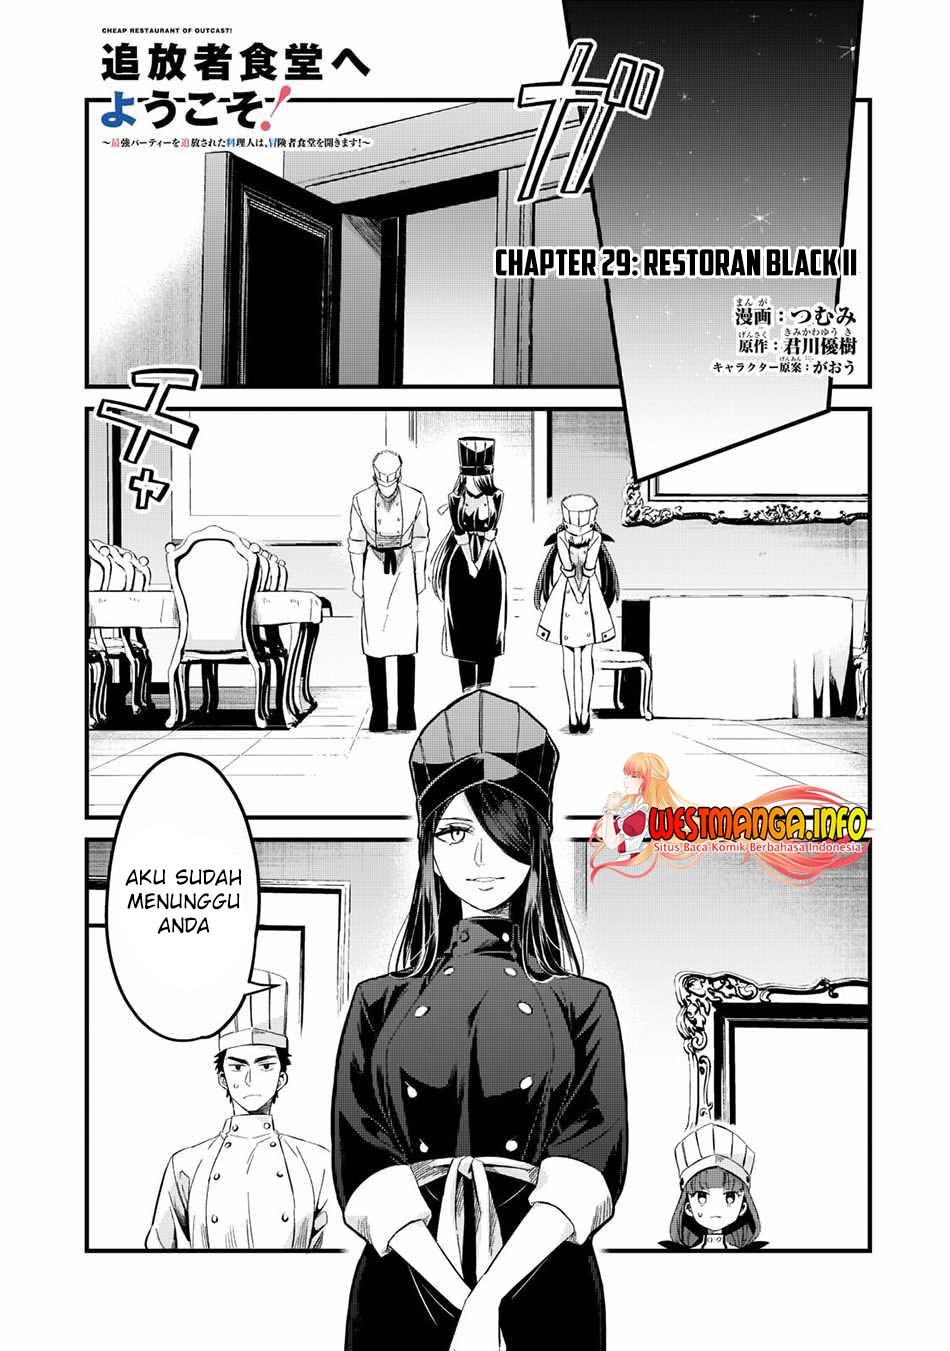 Welcome to Cheap Restaurant of Outcasts! Chapter 29